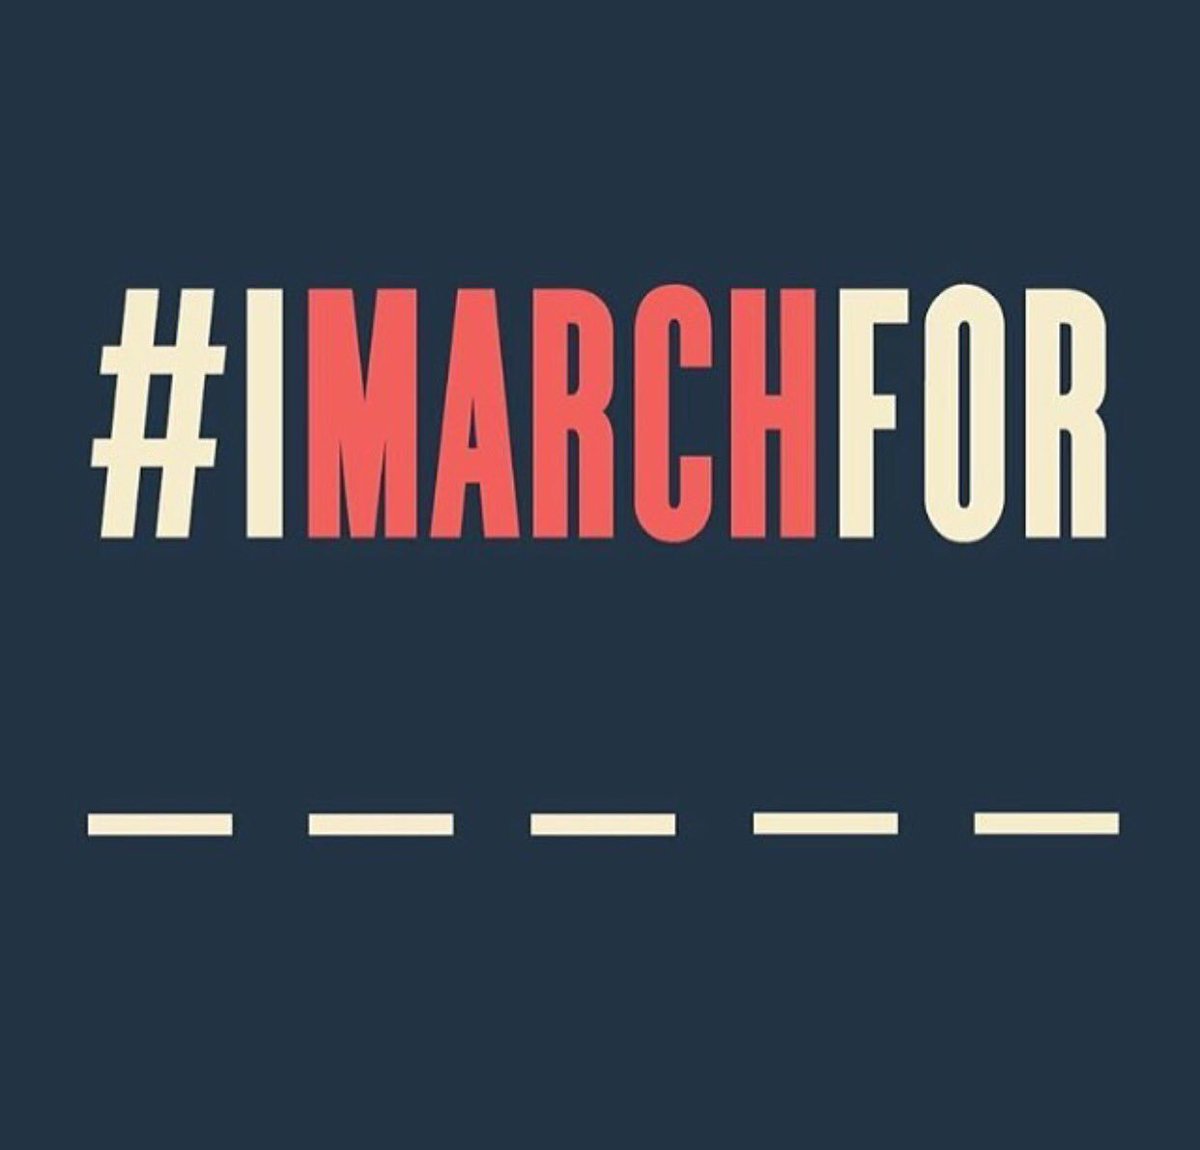 What or who do you march for? @womensmarchla See you there ✊????✊????✊????✊????✊???? https://t.co/ocrJ00Hz6H